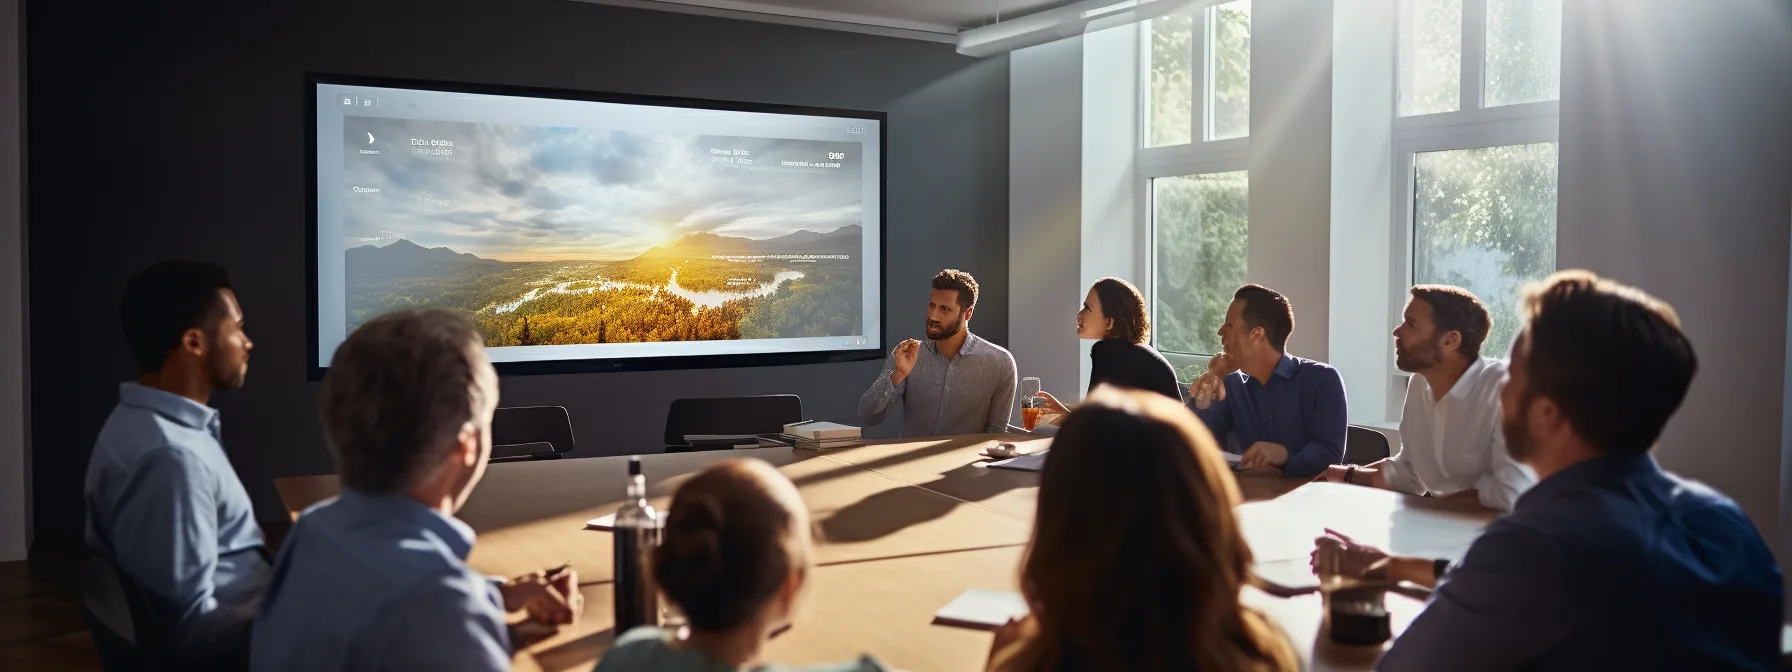 a group of marketers working together in a classroom setting, engaged in a lecture on seo theory with a projection of seo slides on a screen at the front.